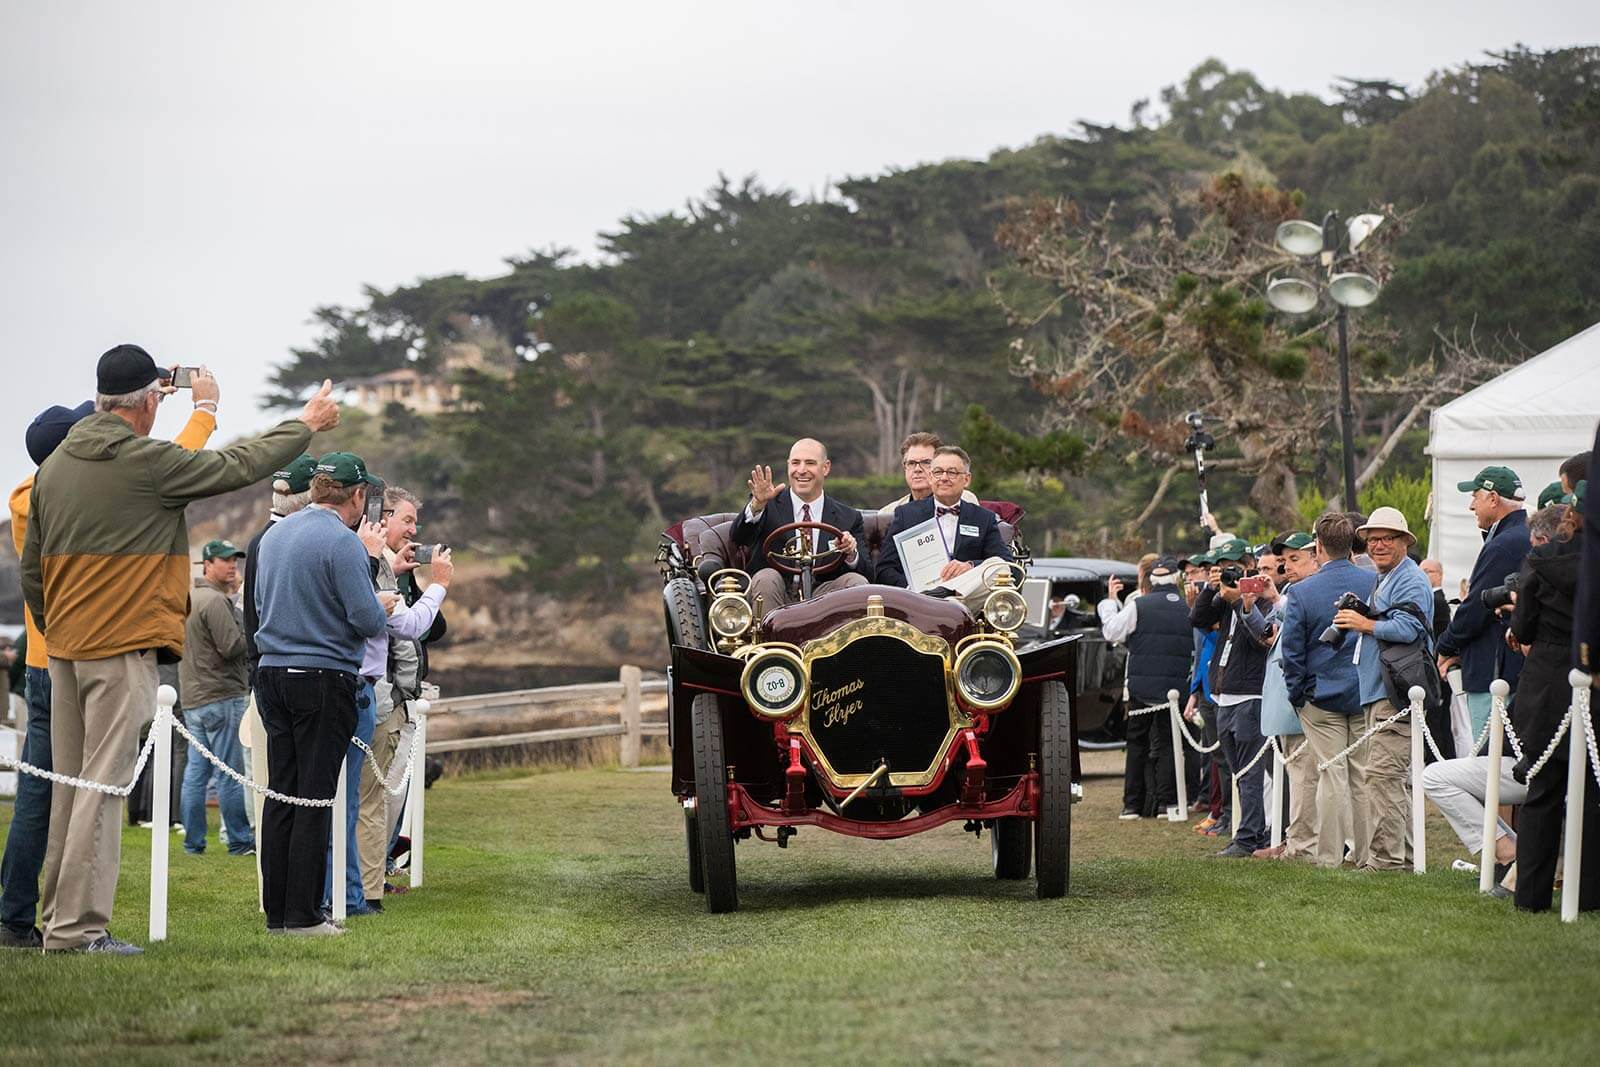 Dawn Patrol presented by Hagerty at the Pebble Beach Concours d'Elegance